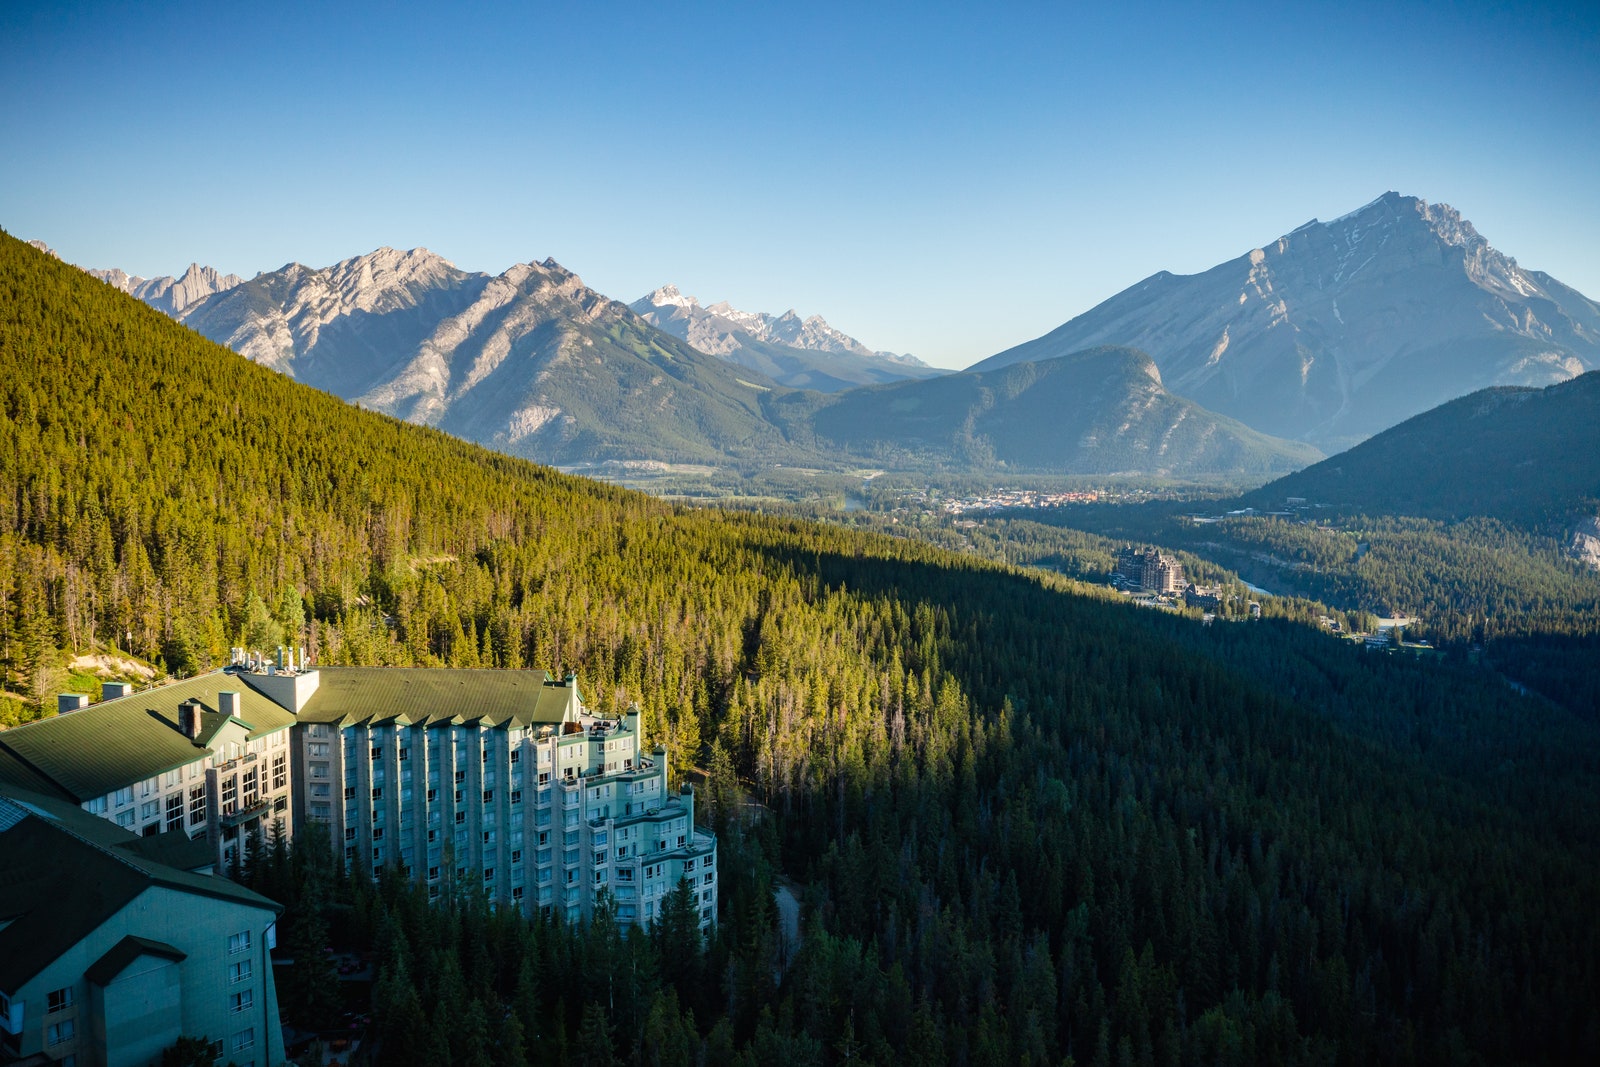 The Best Places to Stay in Banff National Park